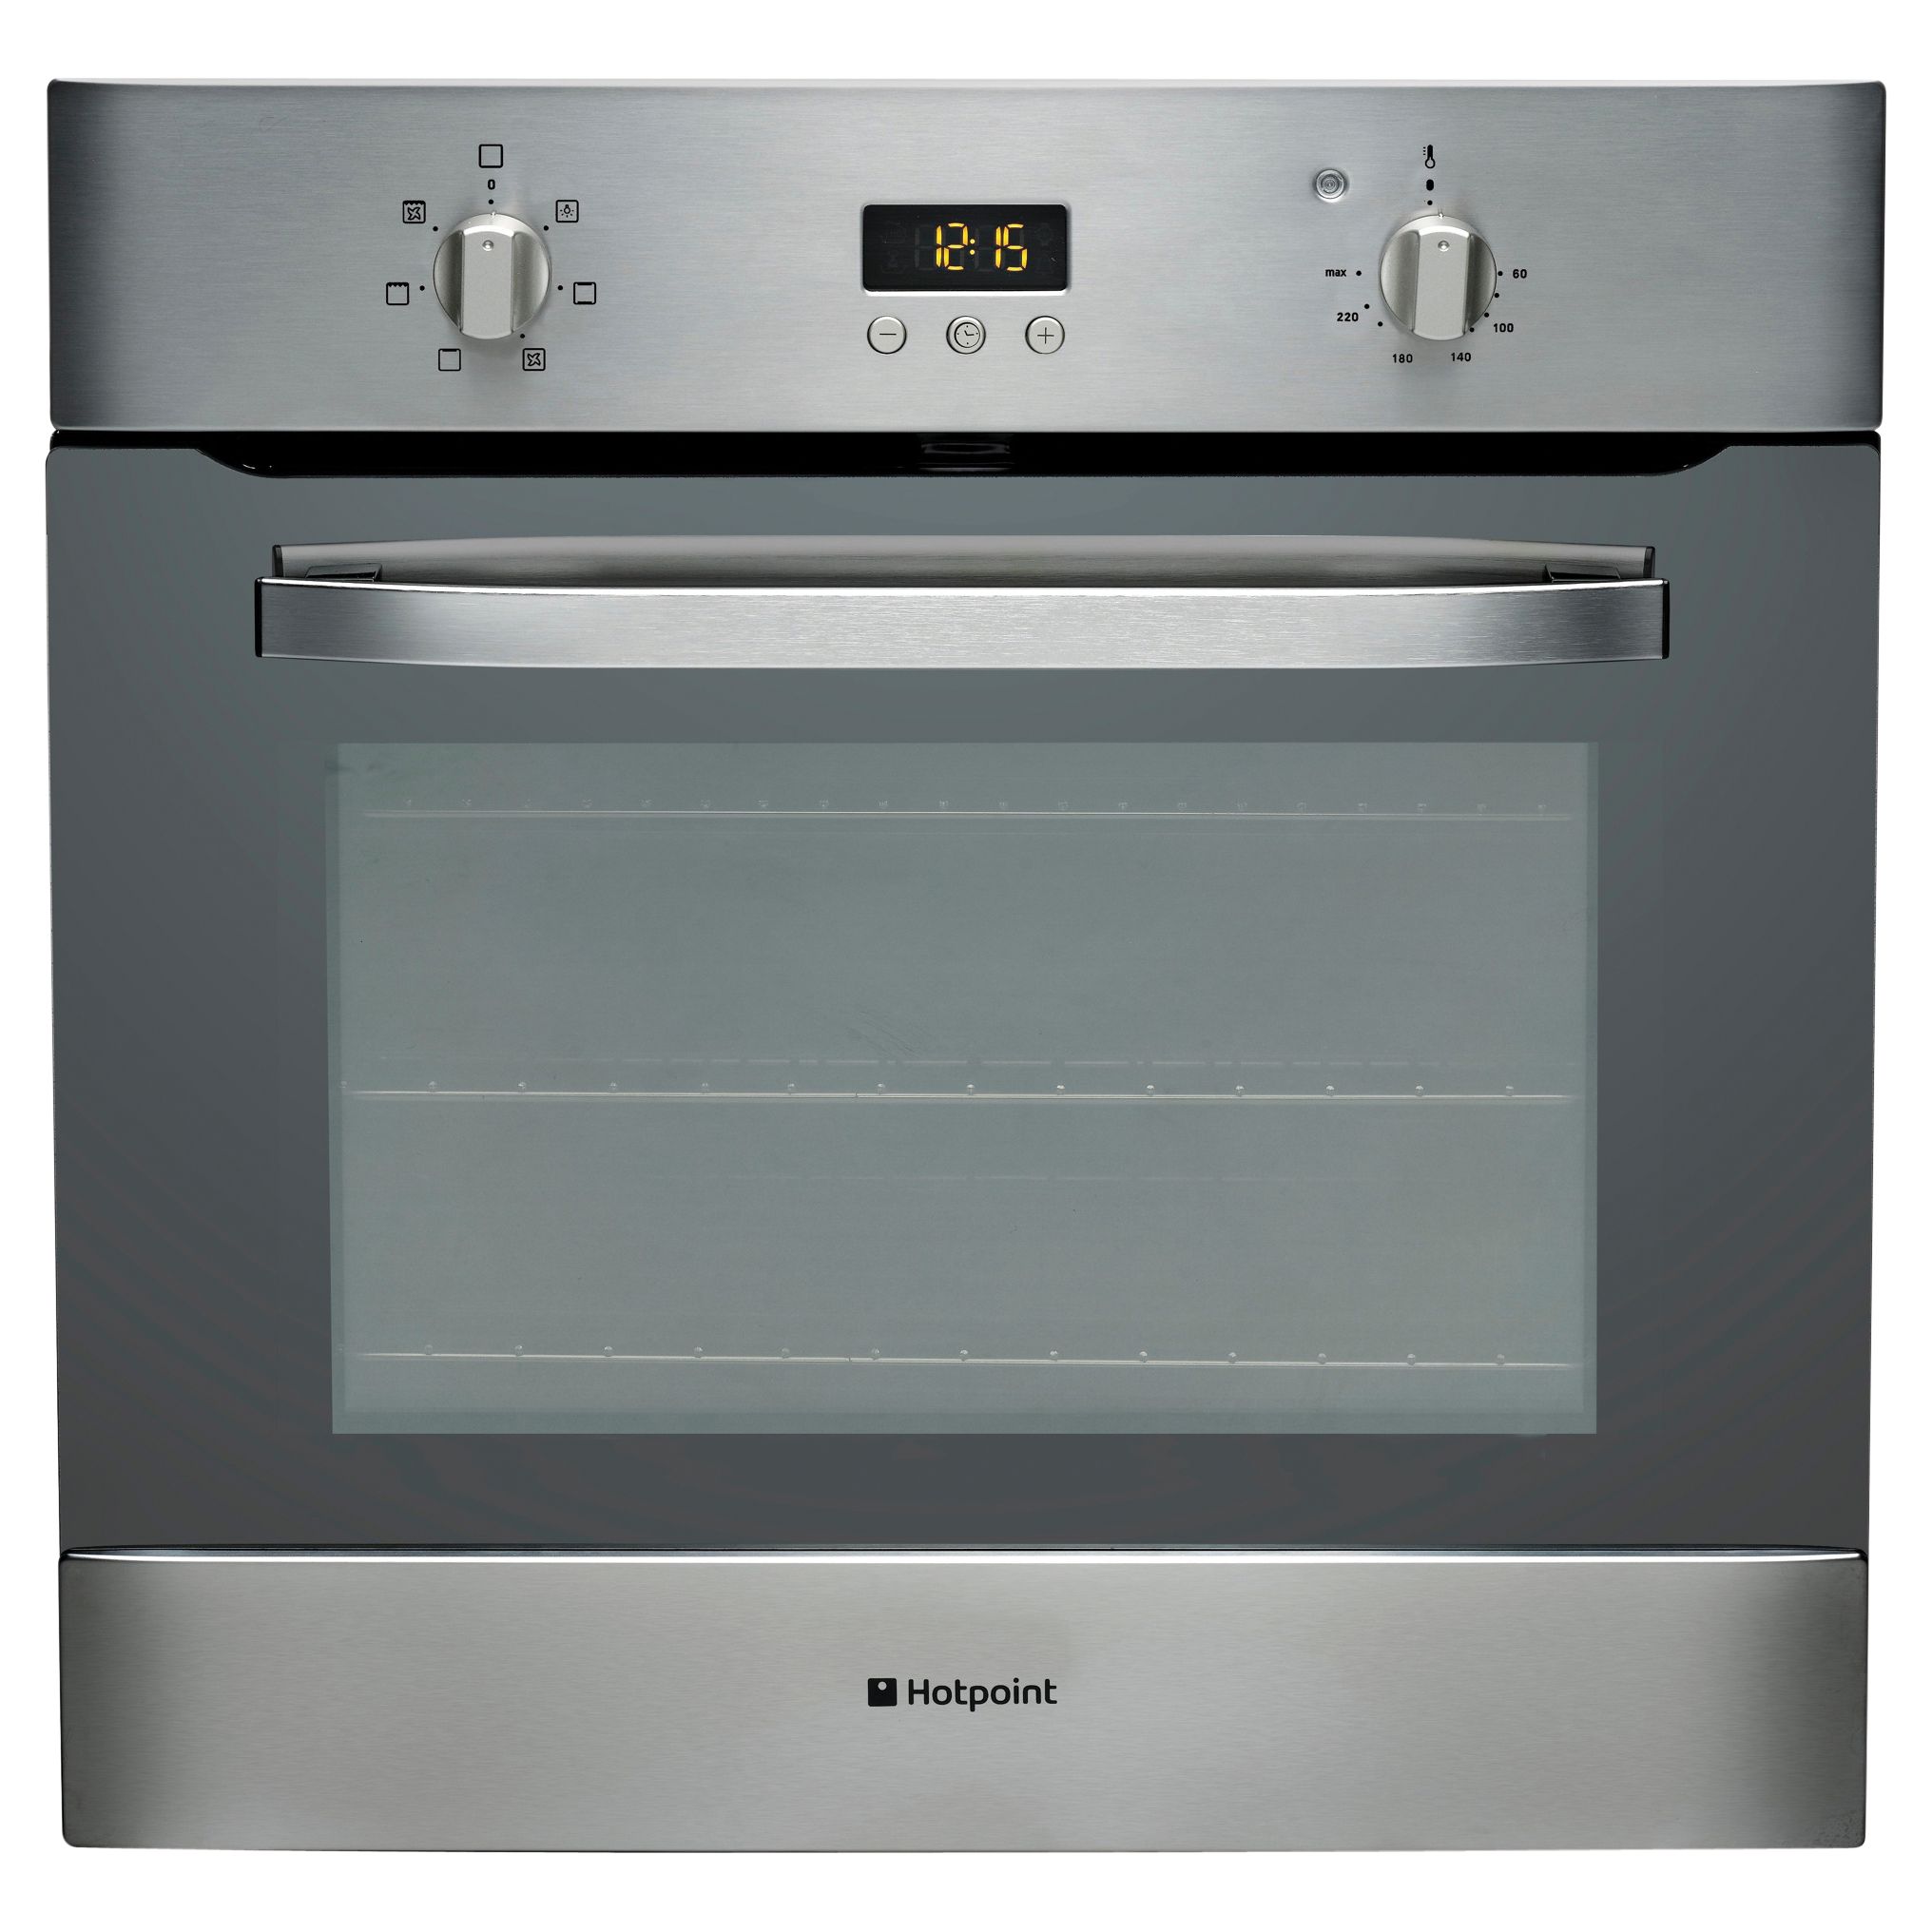 Hotpoint SH53X Single Electric Oven, Stainless Steel at John Lewis